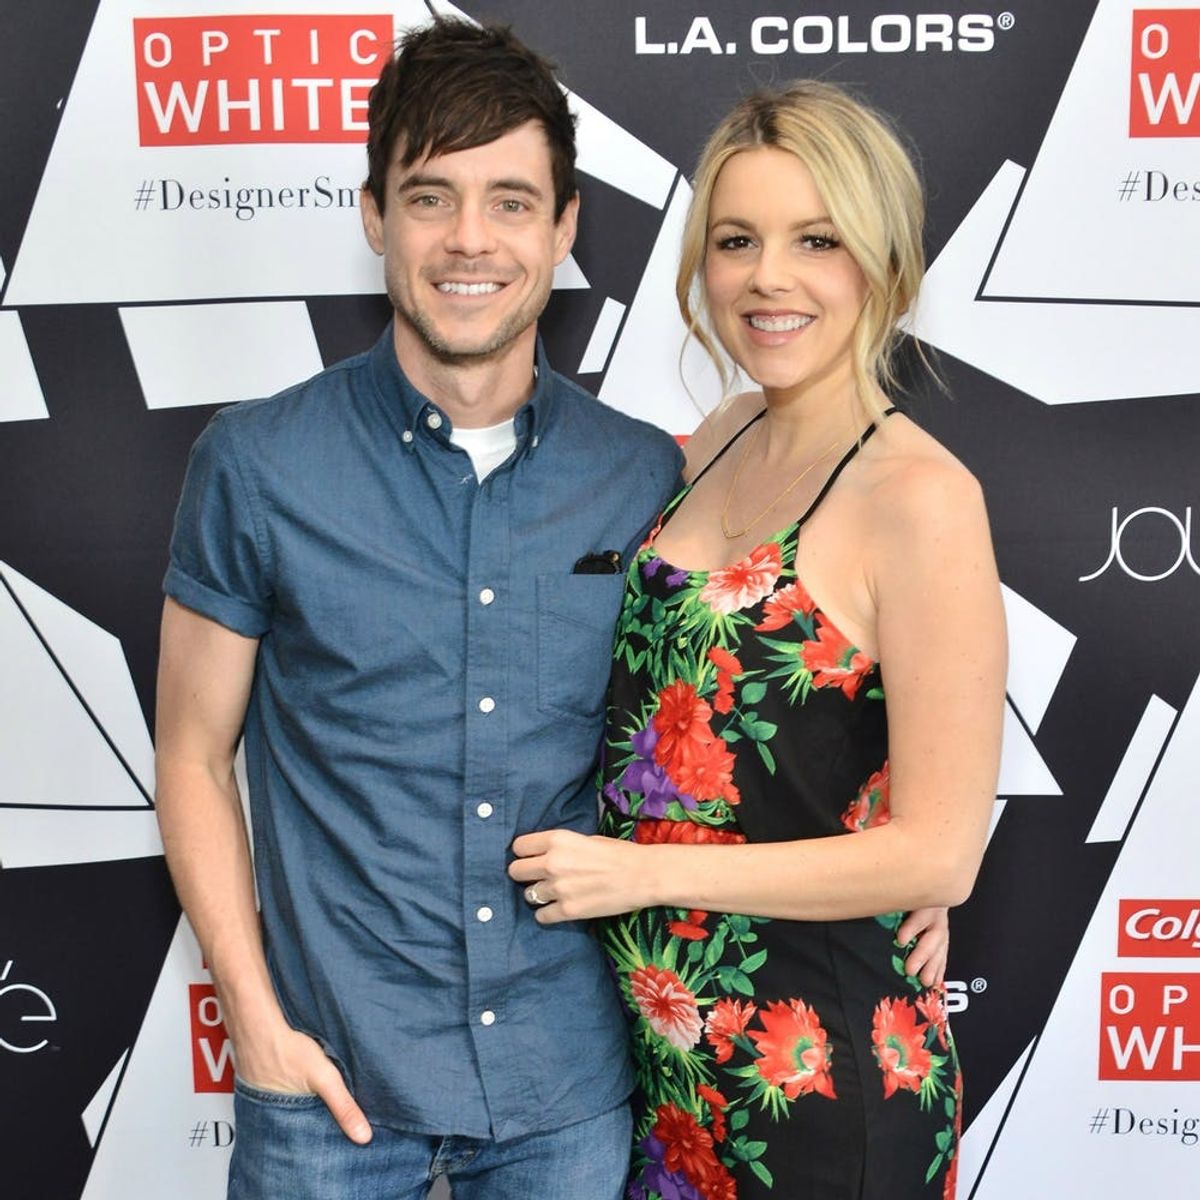 Here’s Your First Look at Ali Fedotowsky’s Darling Newborn Daughter